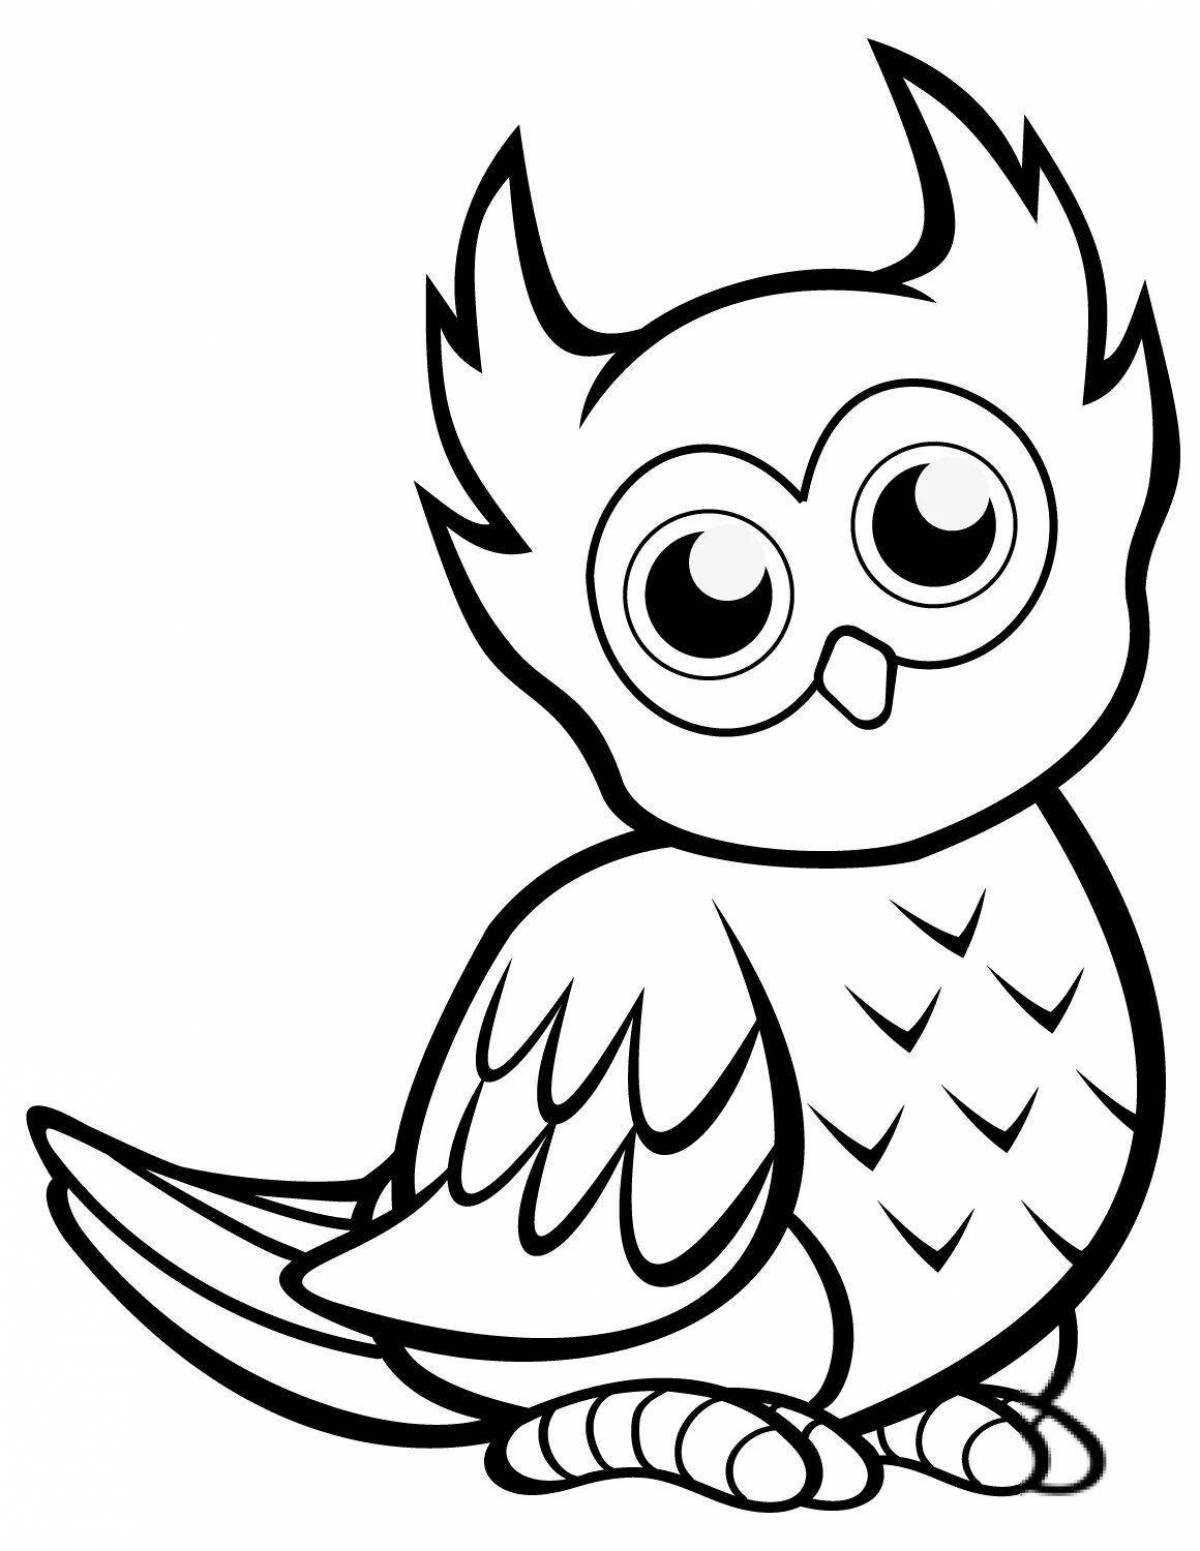 Exciting owlet coloring book for kids